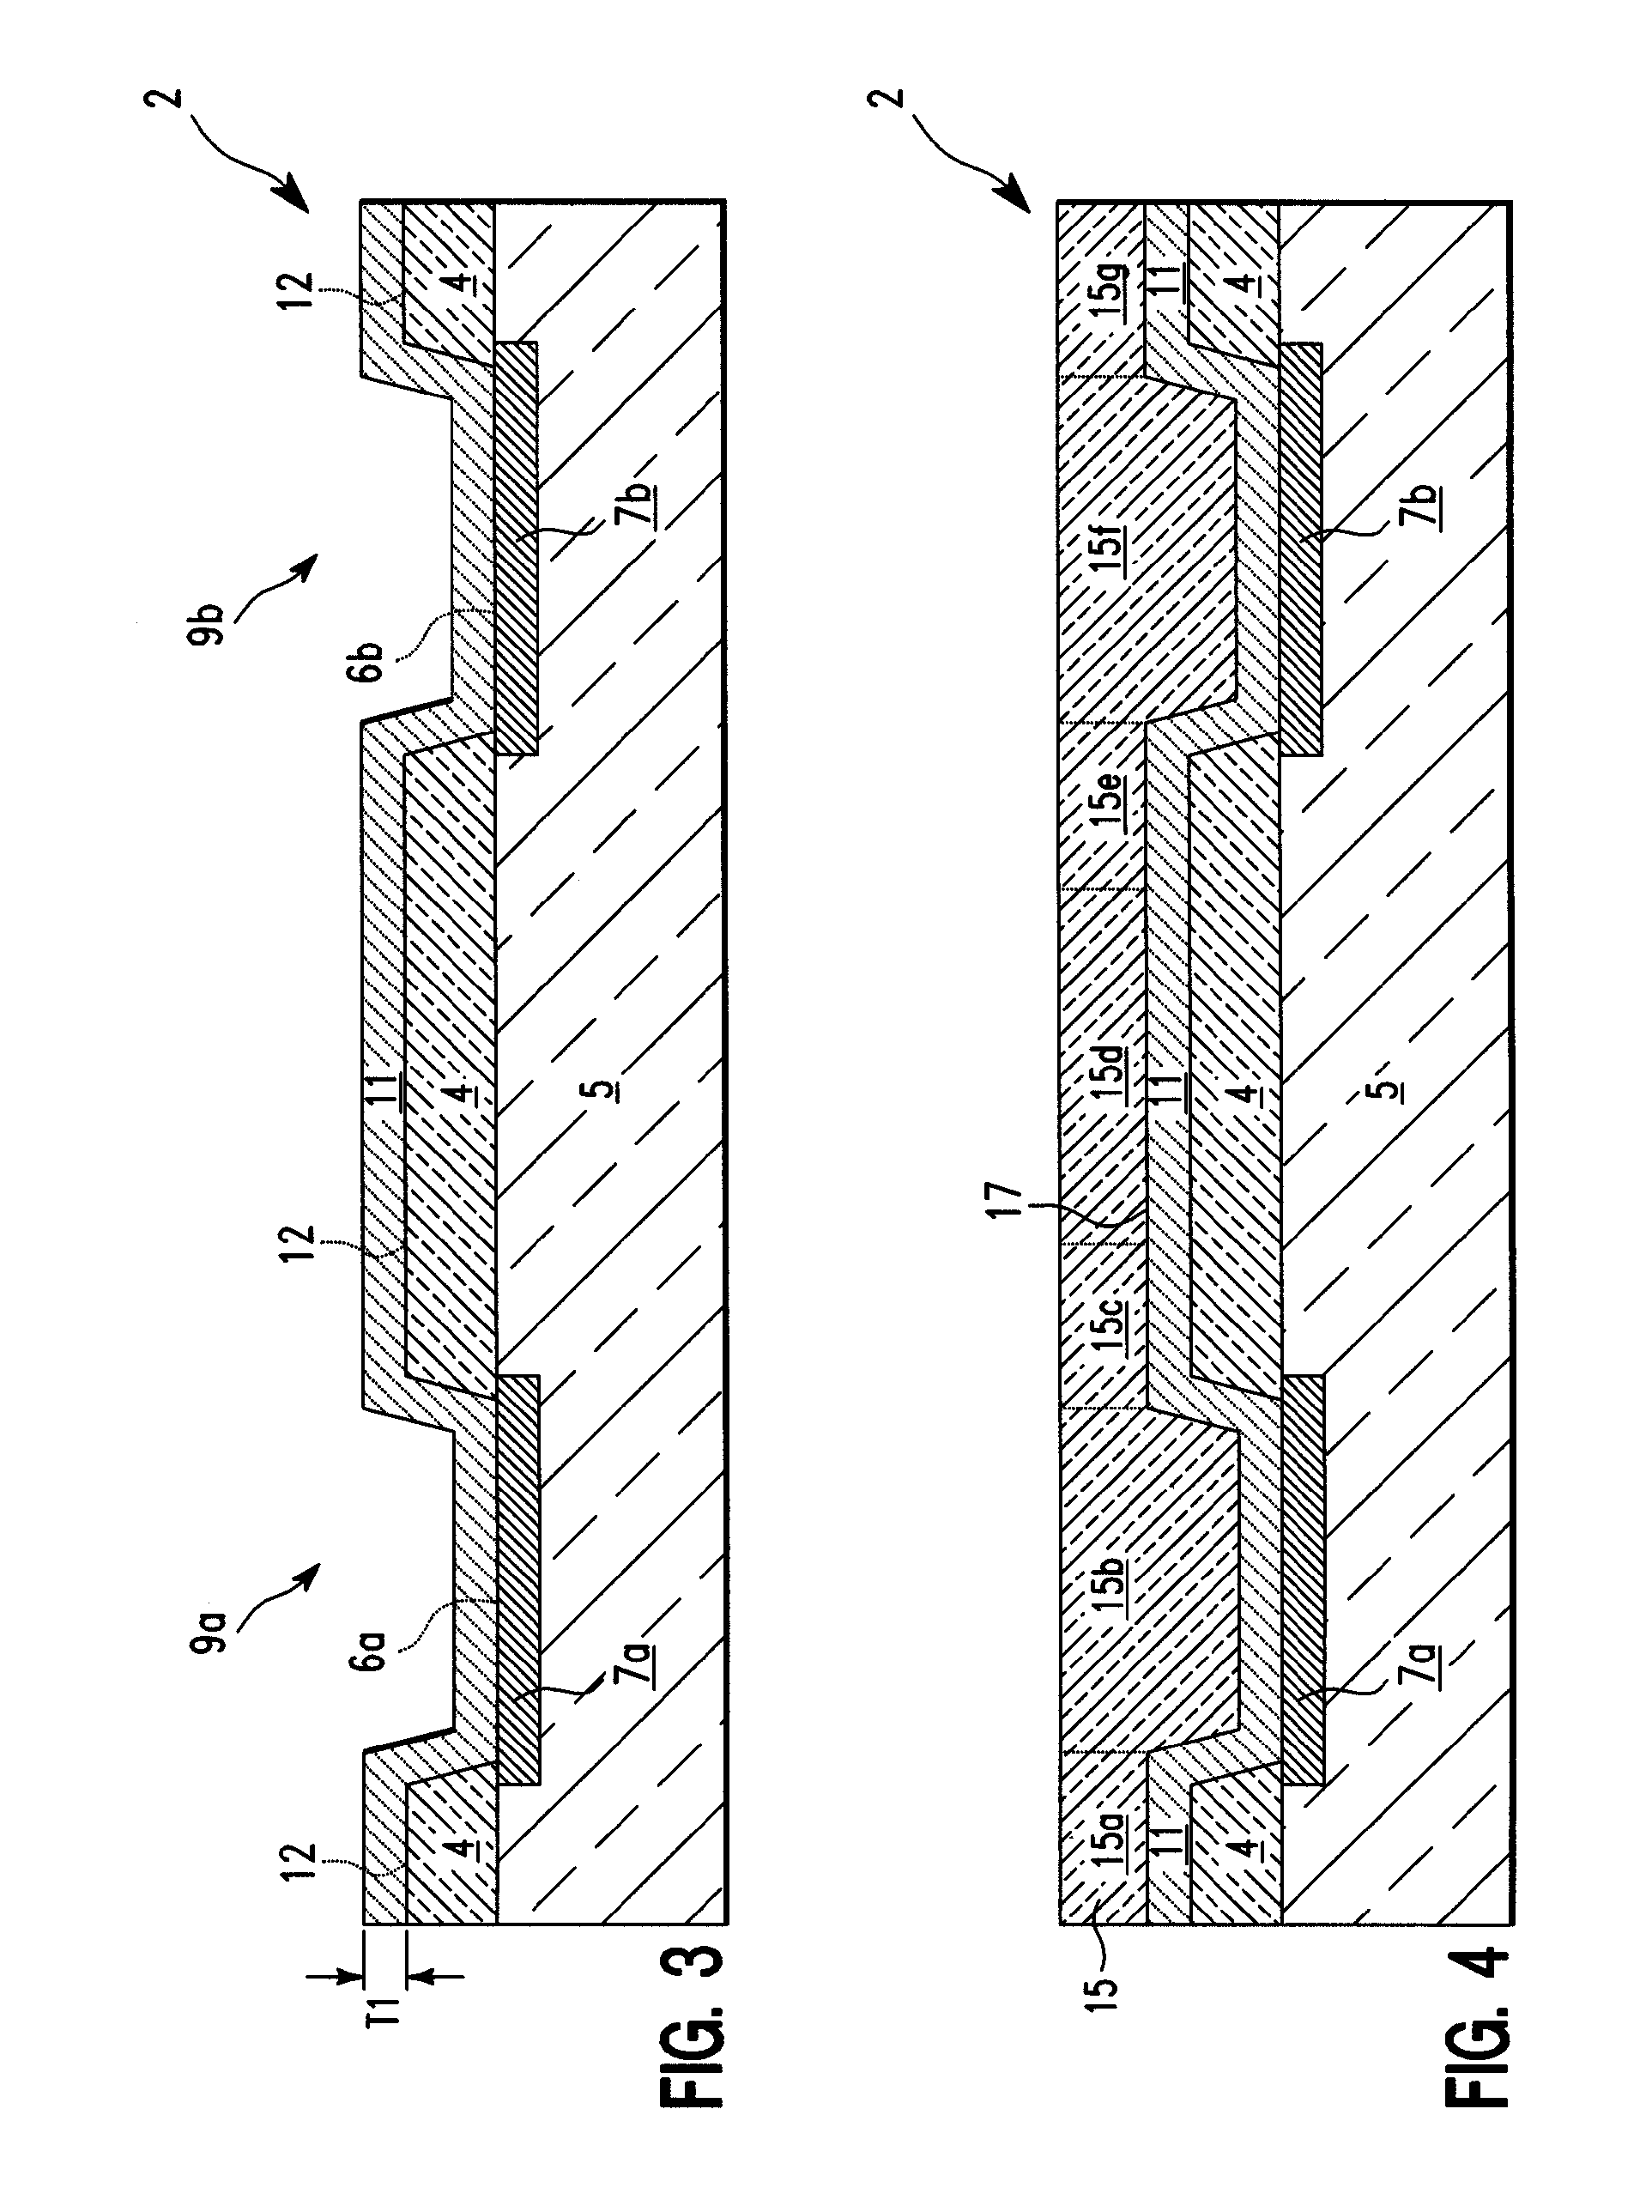 Electrical interconnection structure formation